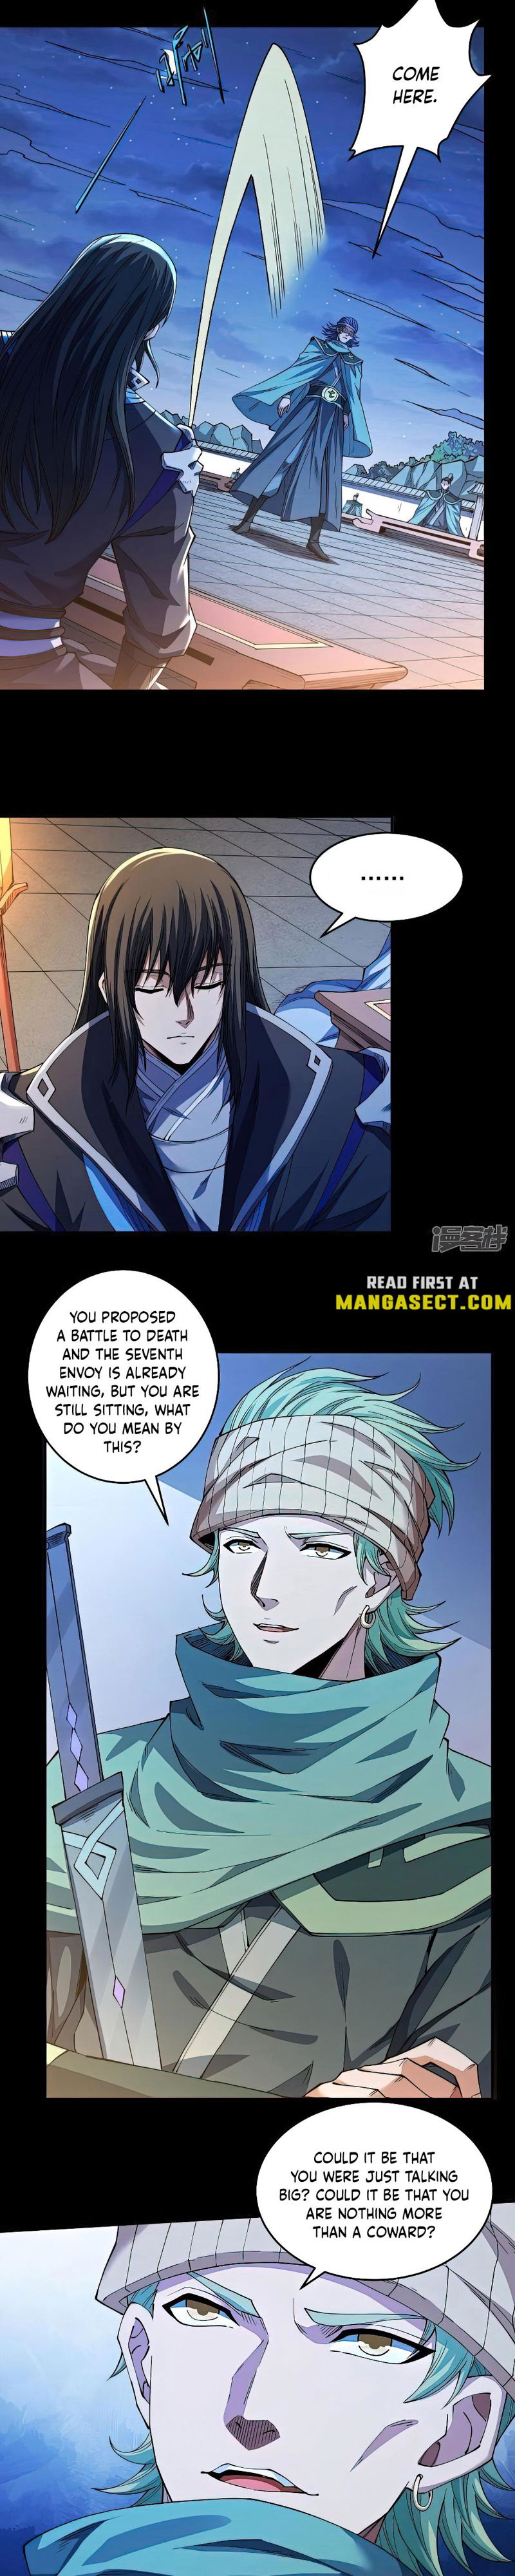 God of Martial Arts Chapter 606 page 3